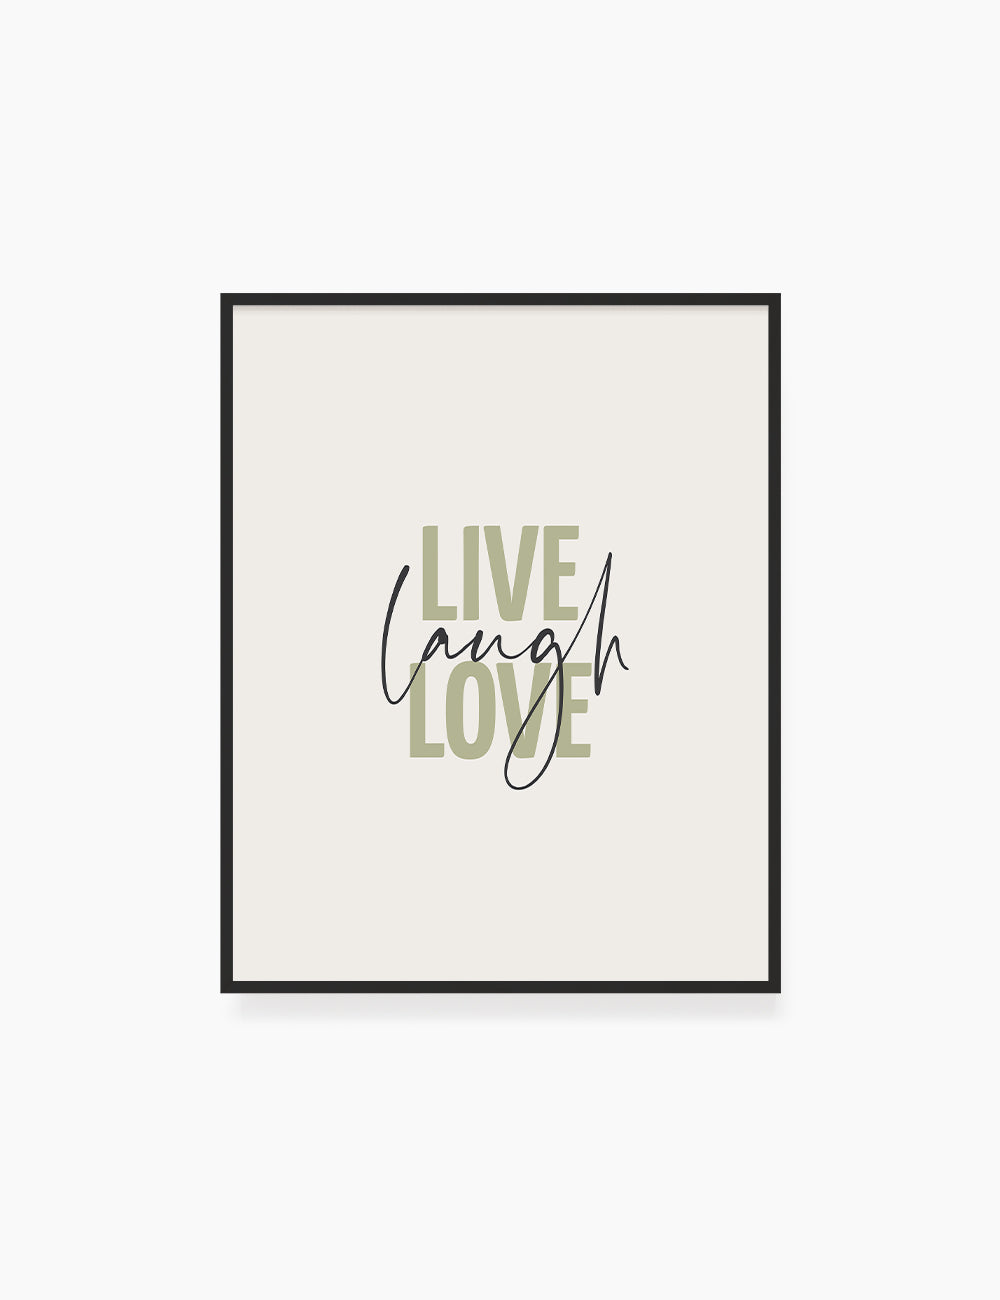 LIVE. LAUGH. LOVE. Green. Beige. Inspirational quote. Printable Wall Art Quote. - PAPER MOON Art & Design